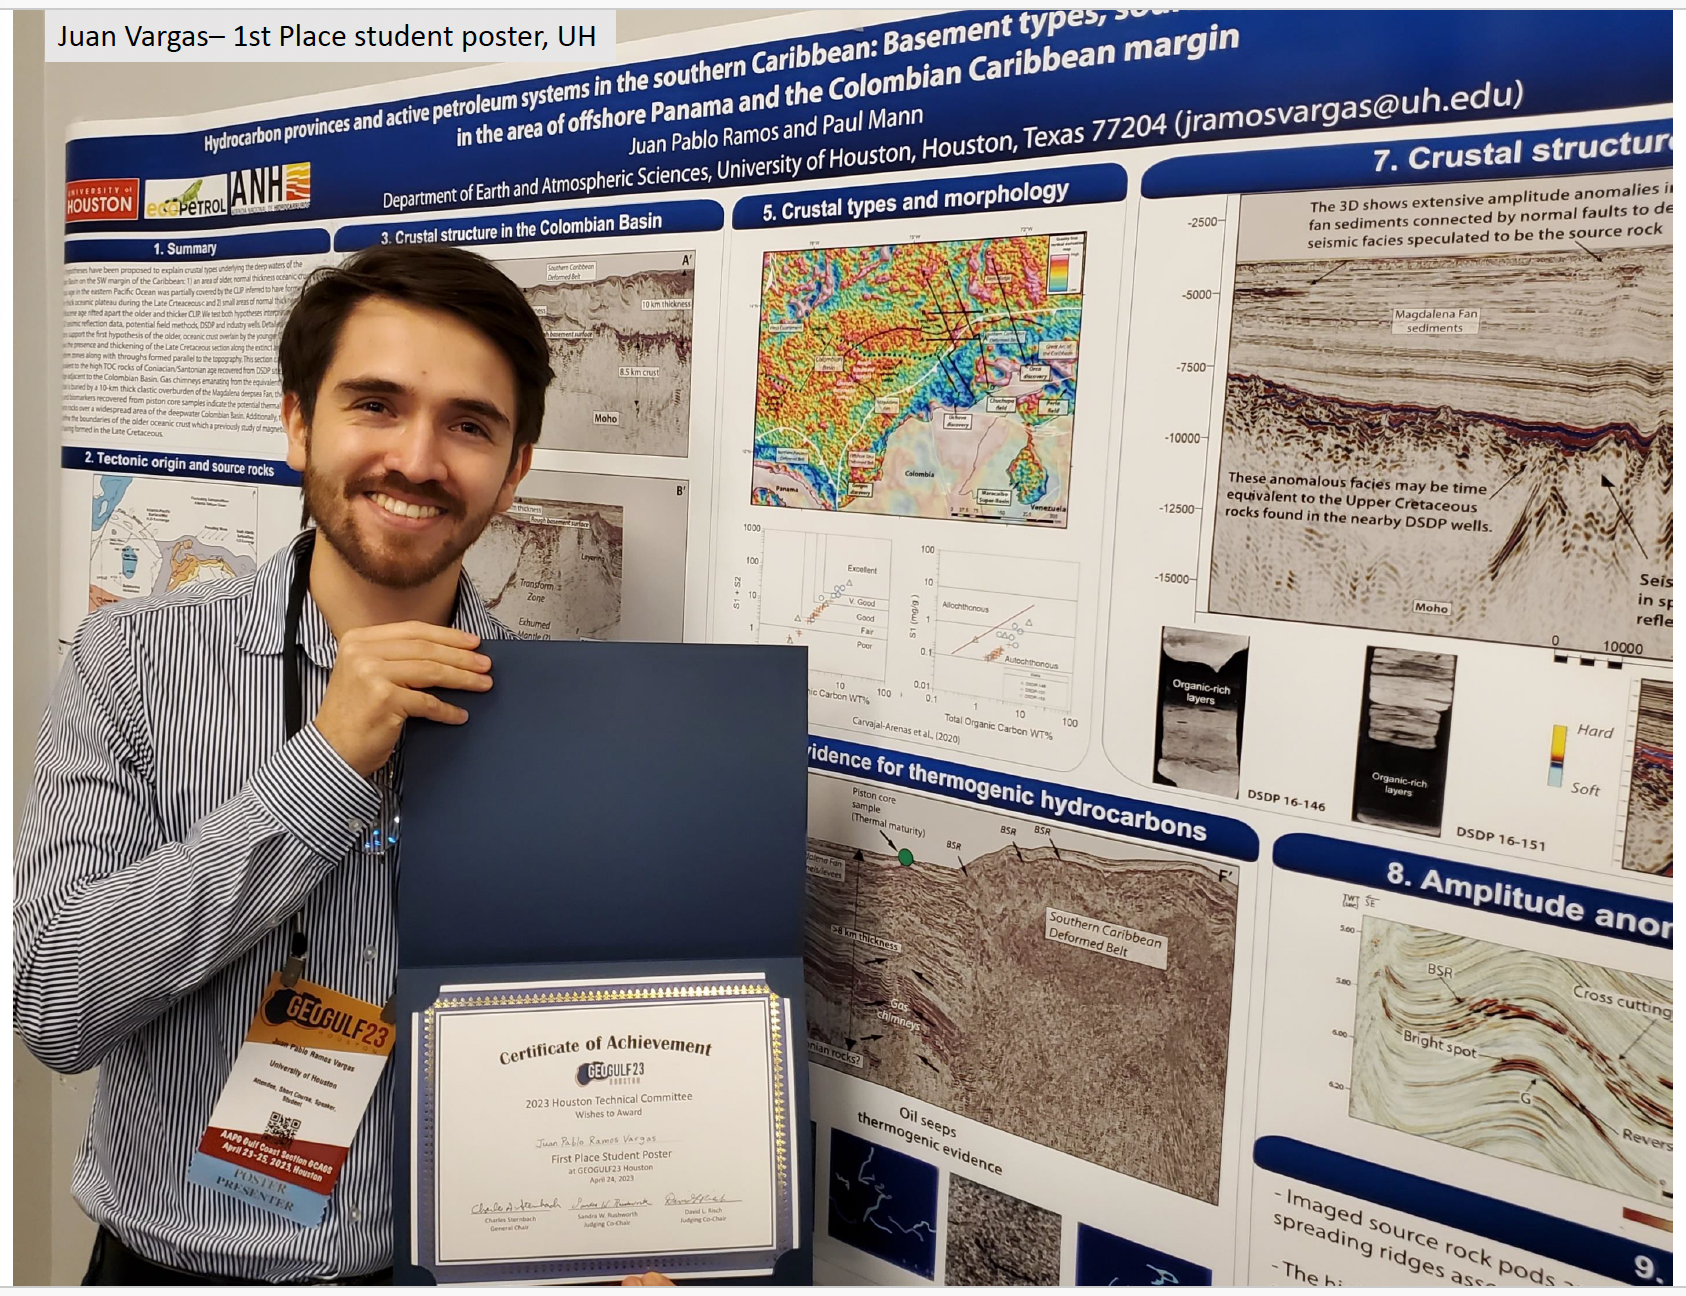 Juan Pablo Ramos wins 1st Place in the Student Poster Competition at GeoGulf23